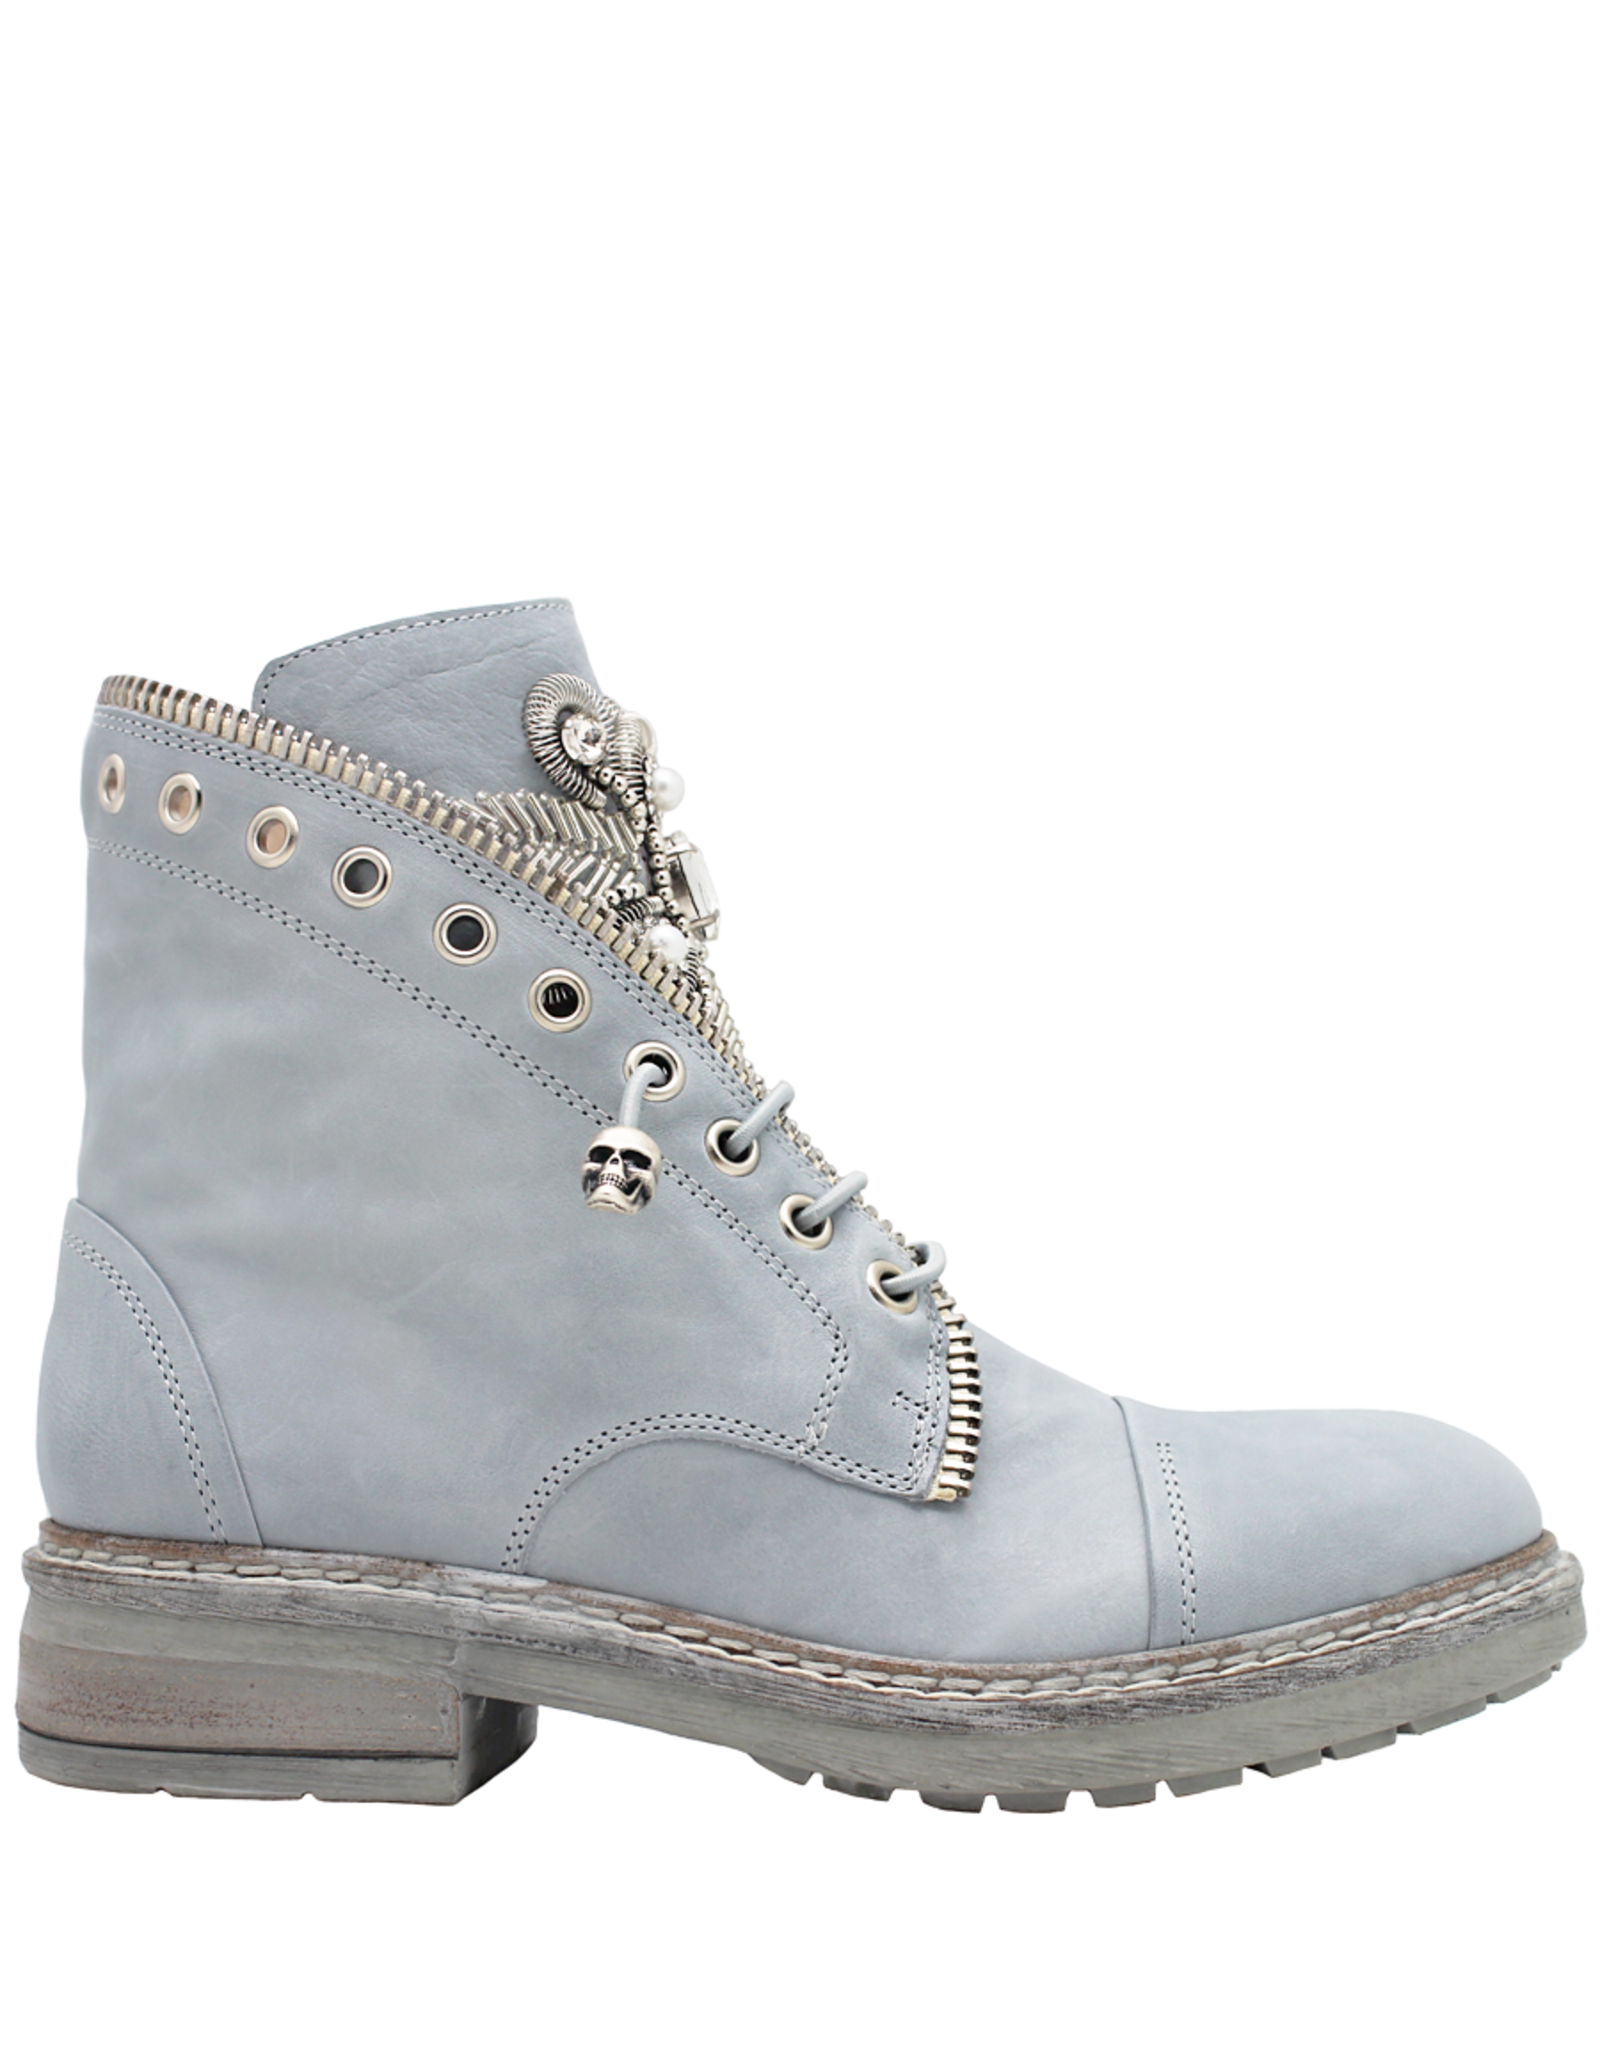 Now Now Sky Pull On Boot with Jewel Detail 7375